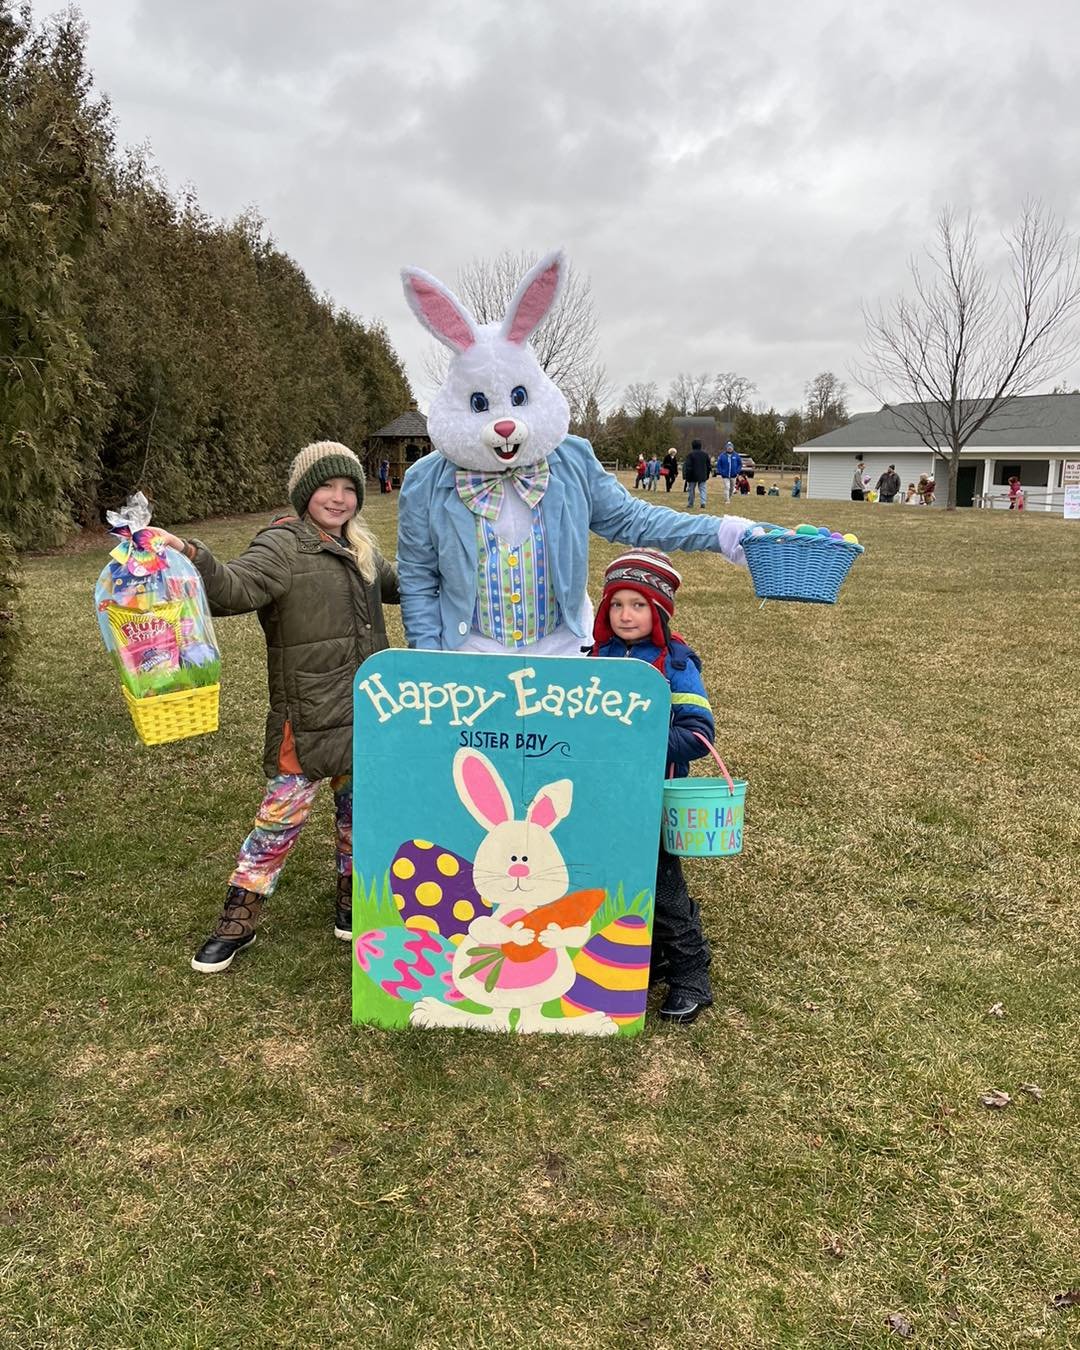 Happy Easter!! 🐇 

Thank you to everyone who came out to our egg hunt yesterday! Pictured are our Golden Egg winners from each age group!

#sisterbay  #doorcounty #egghunt #community